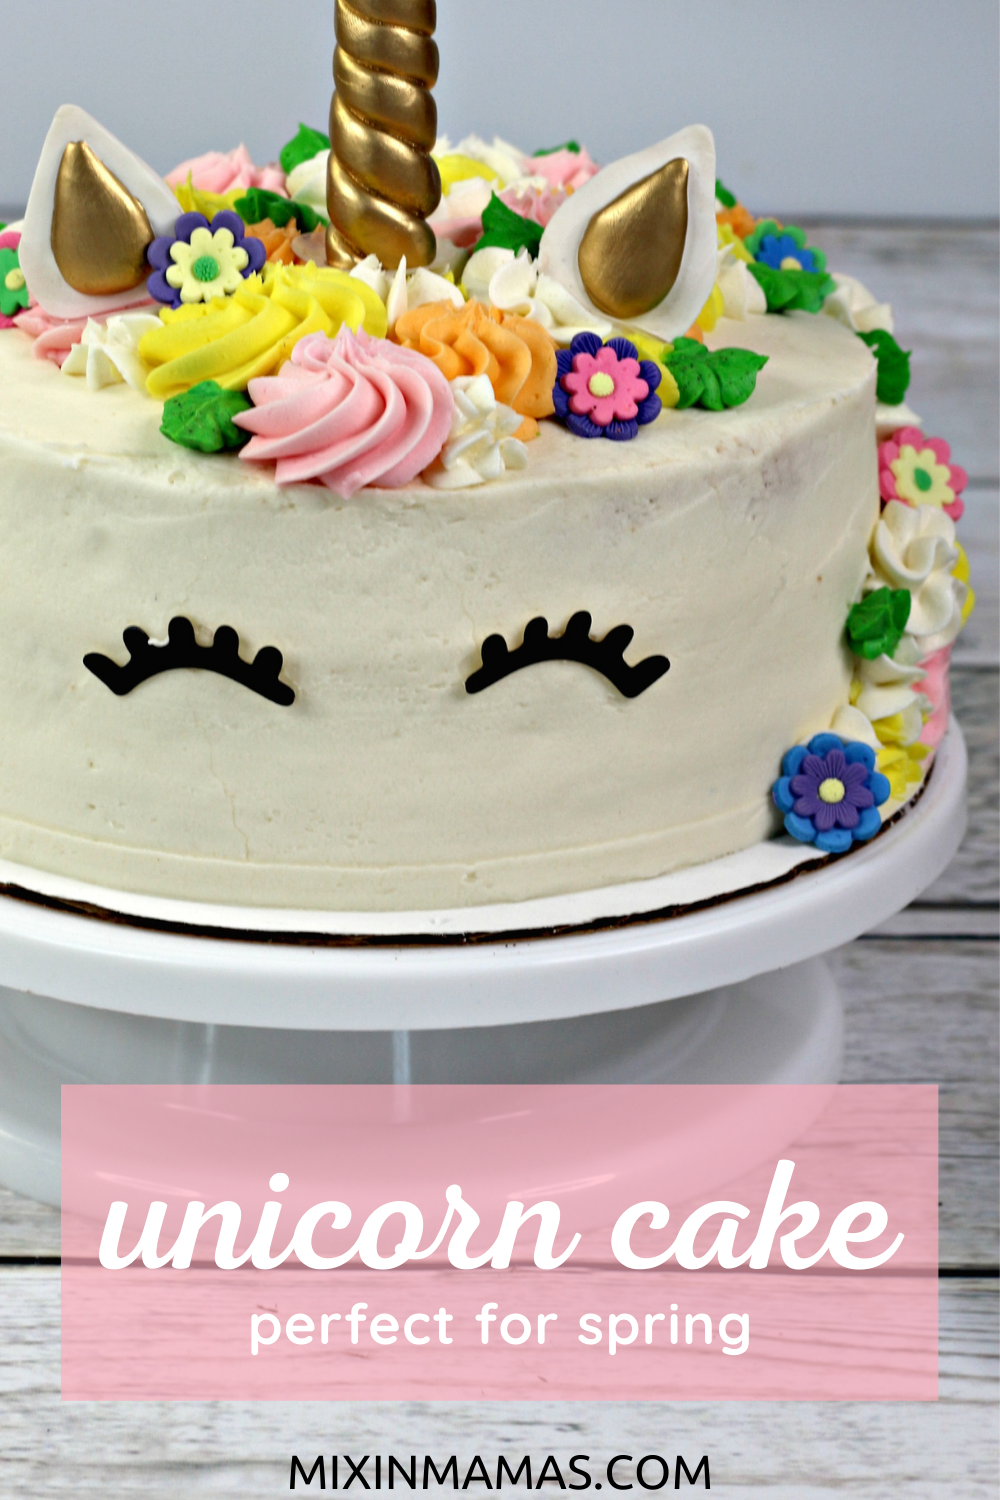 unicorn cake perfect for spring